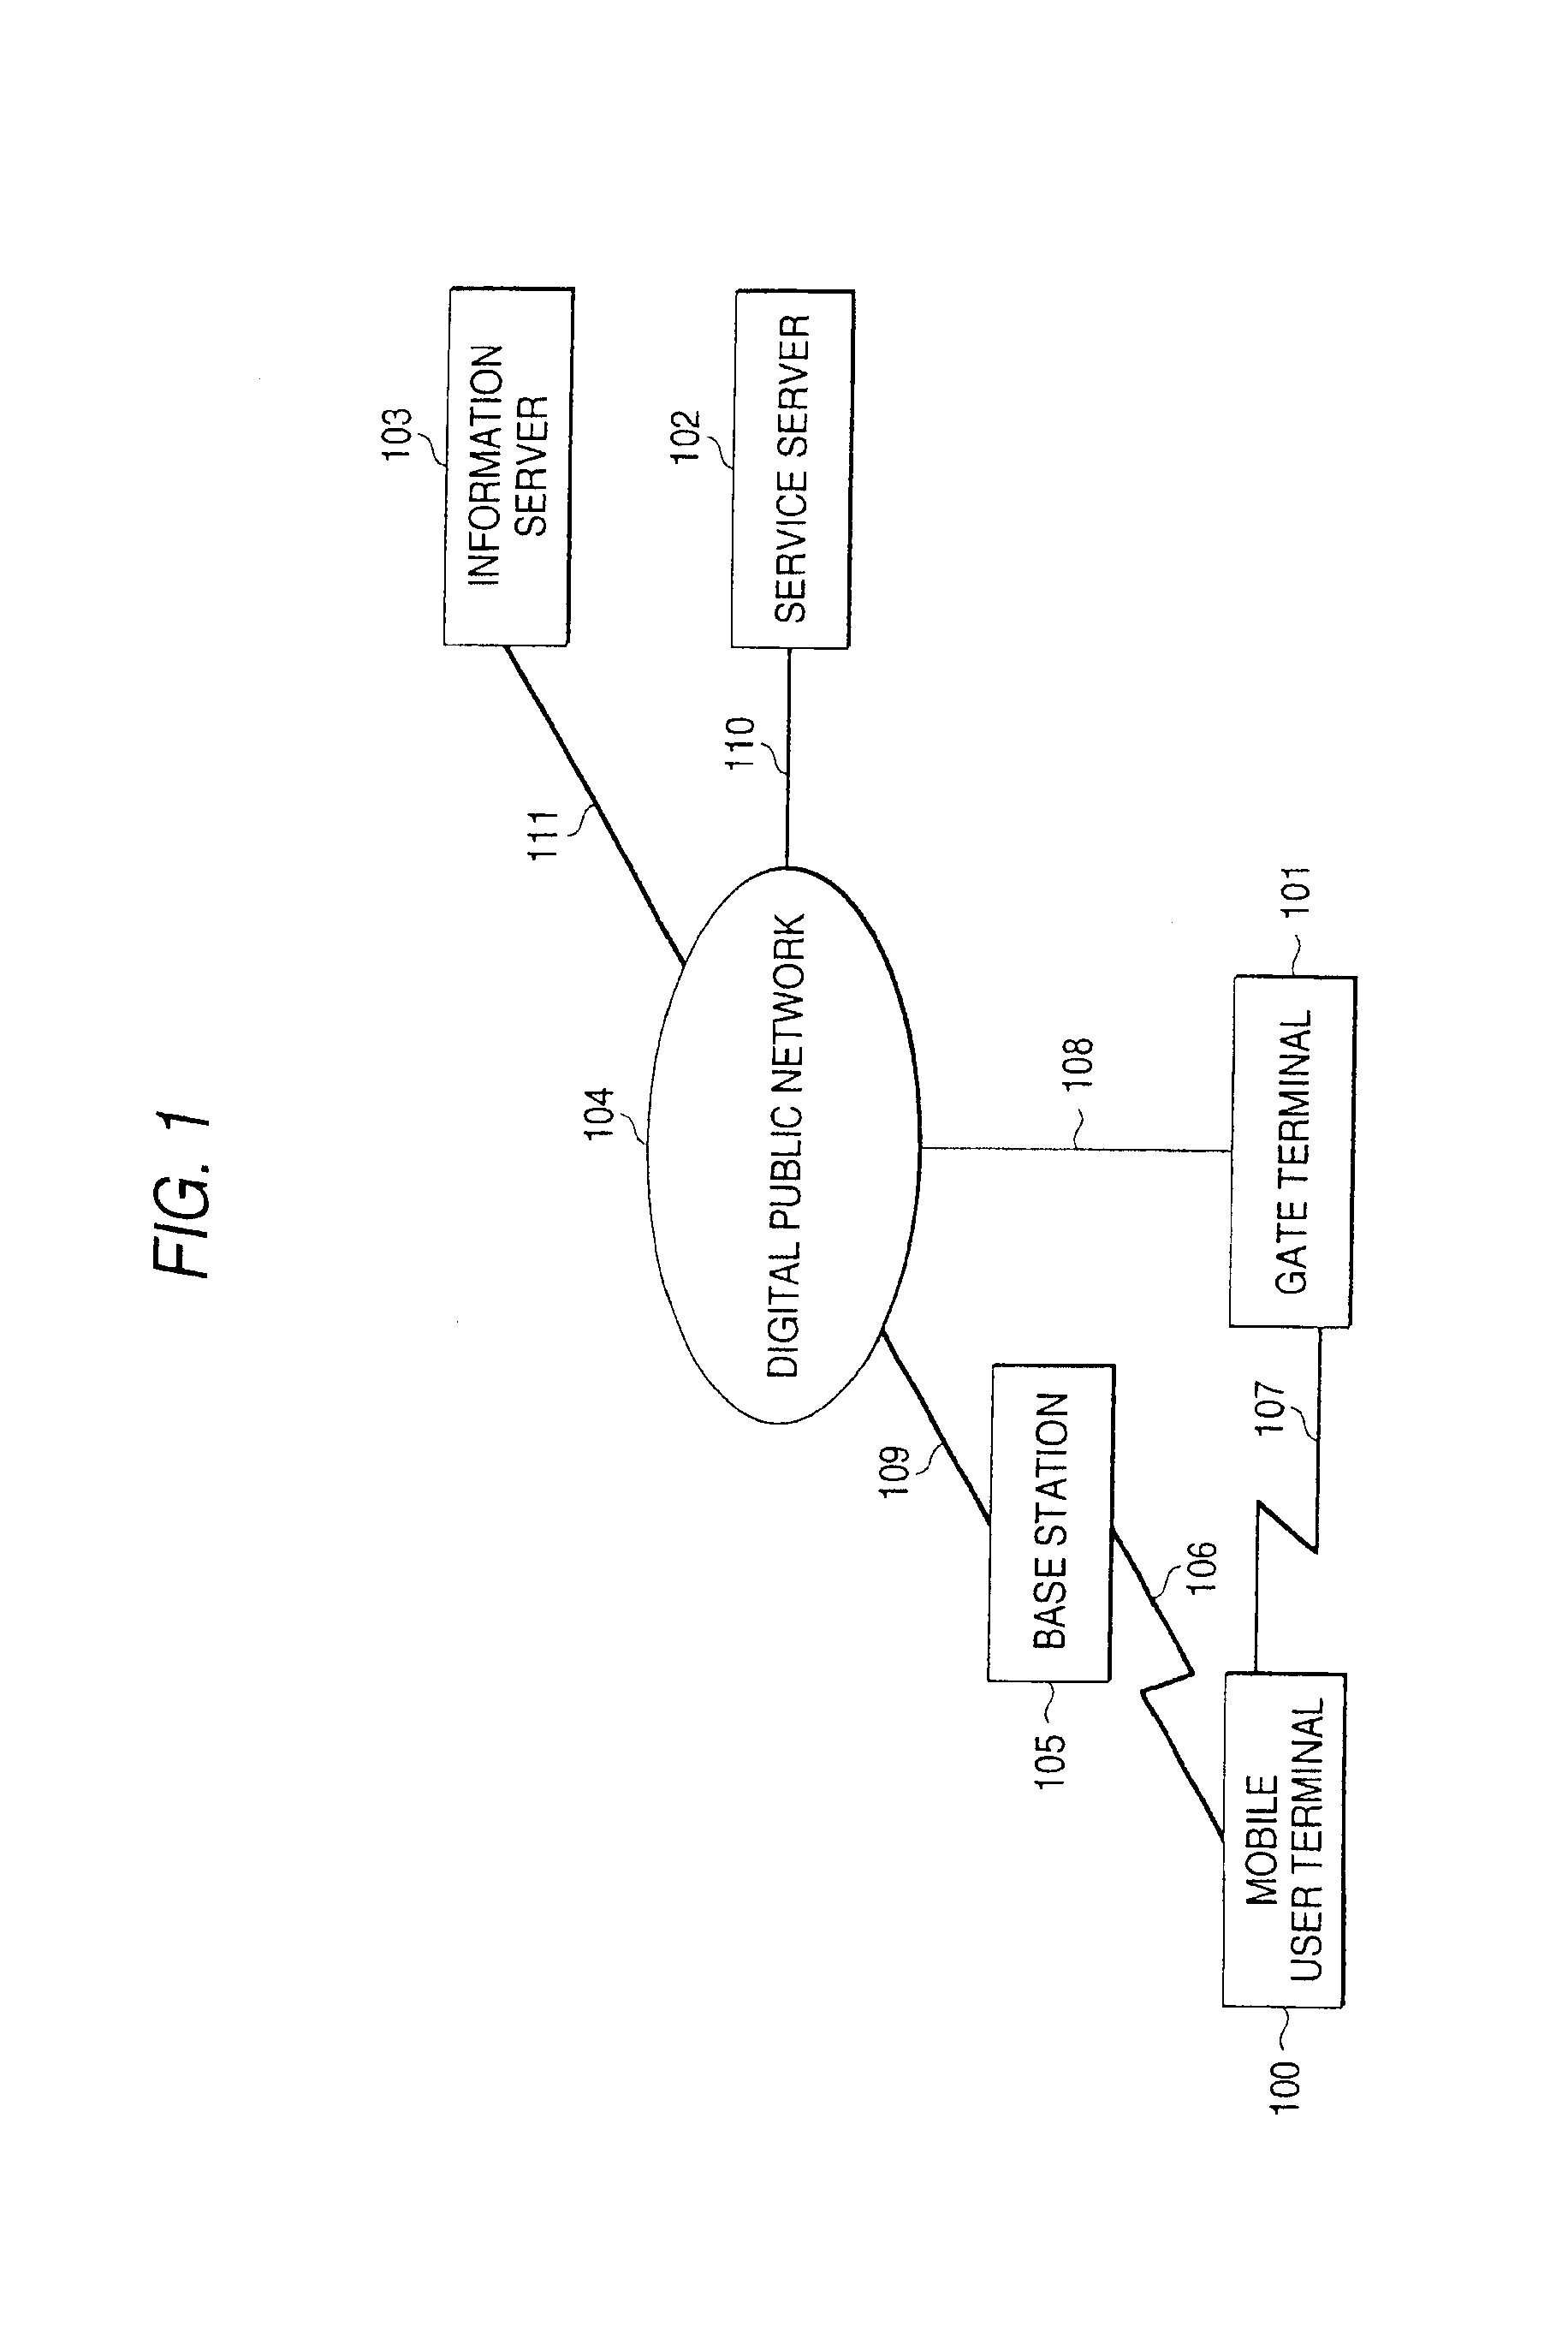 Electronic ticket, electronic wallet, and information terminal